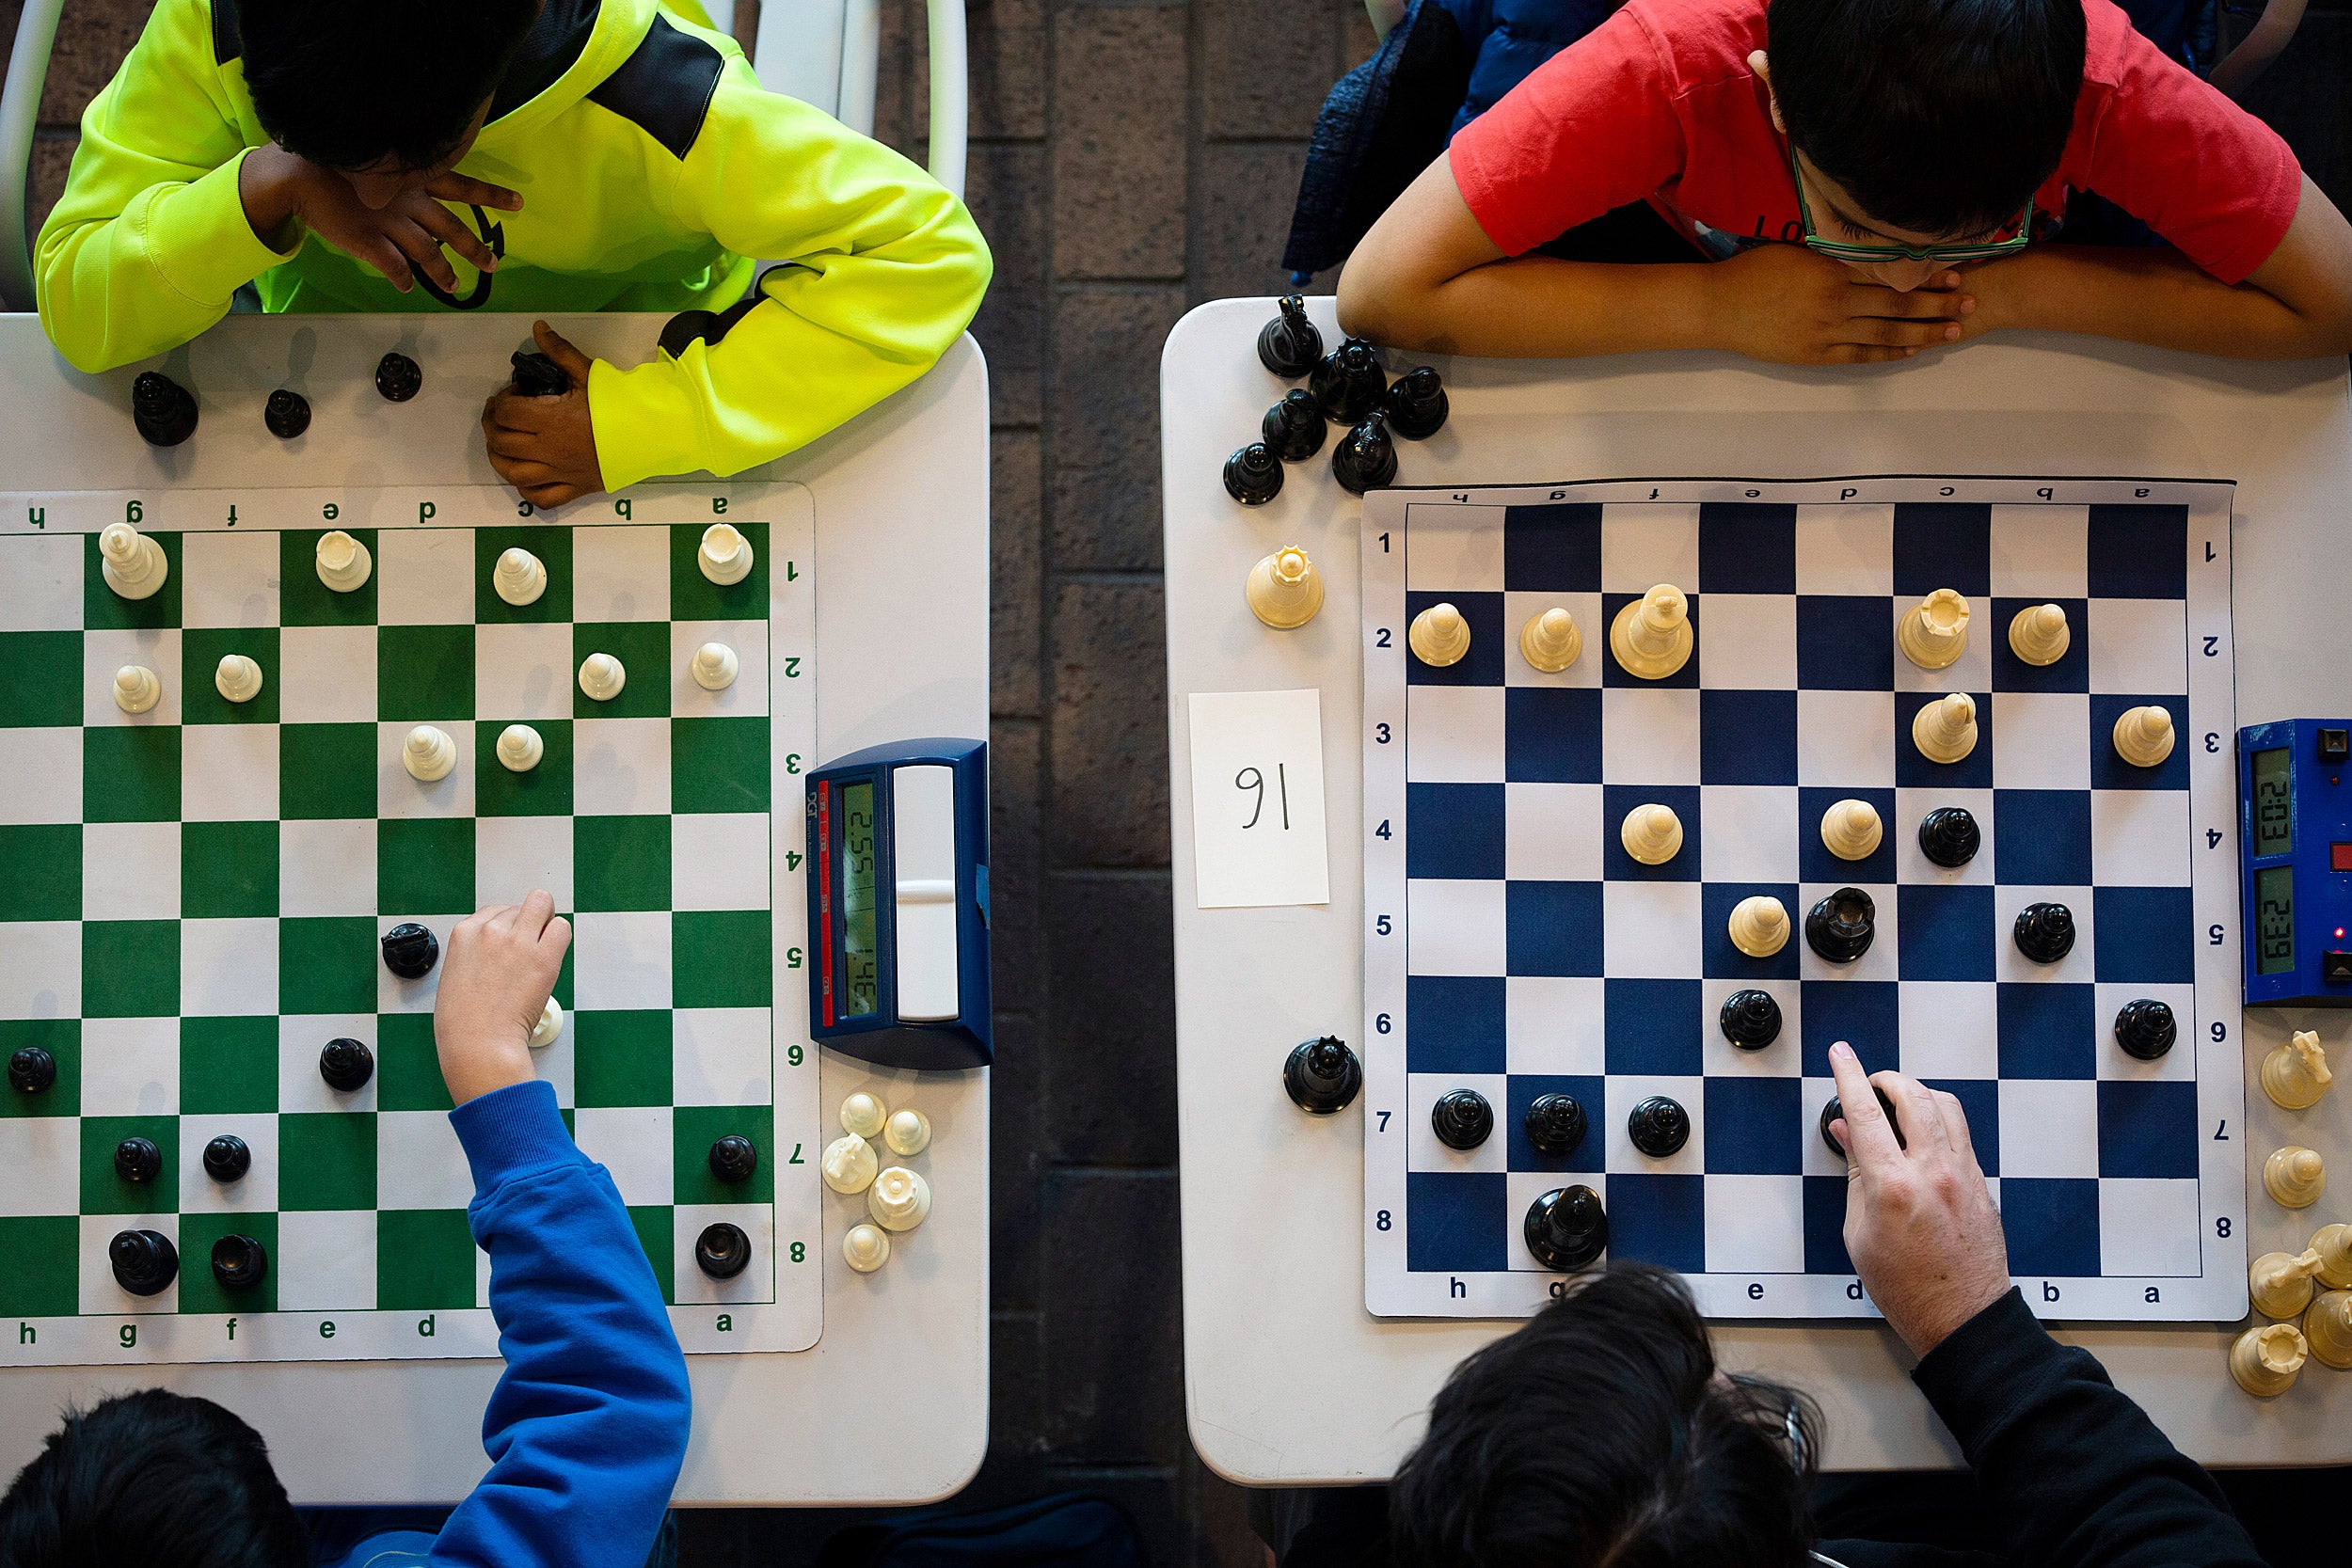 Overview of two chess matches.